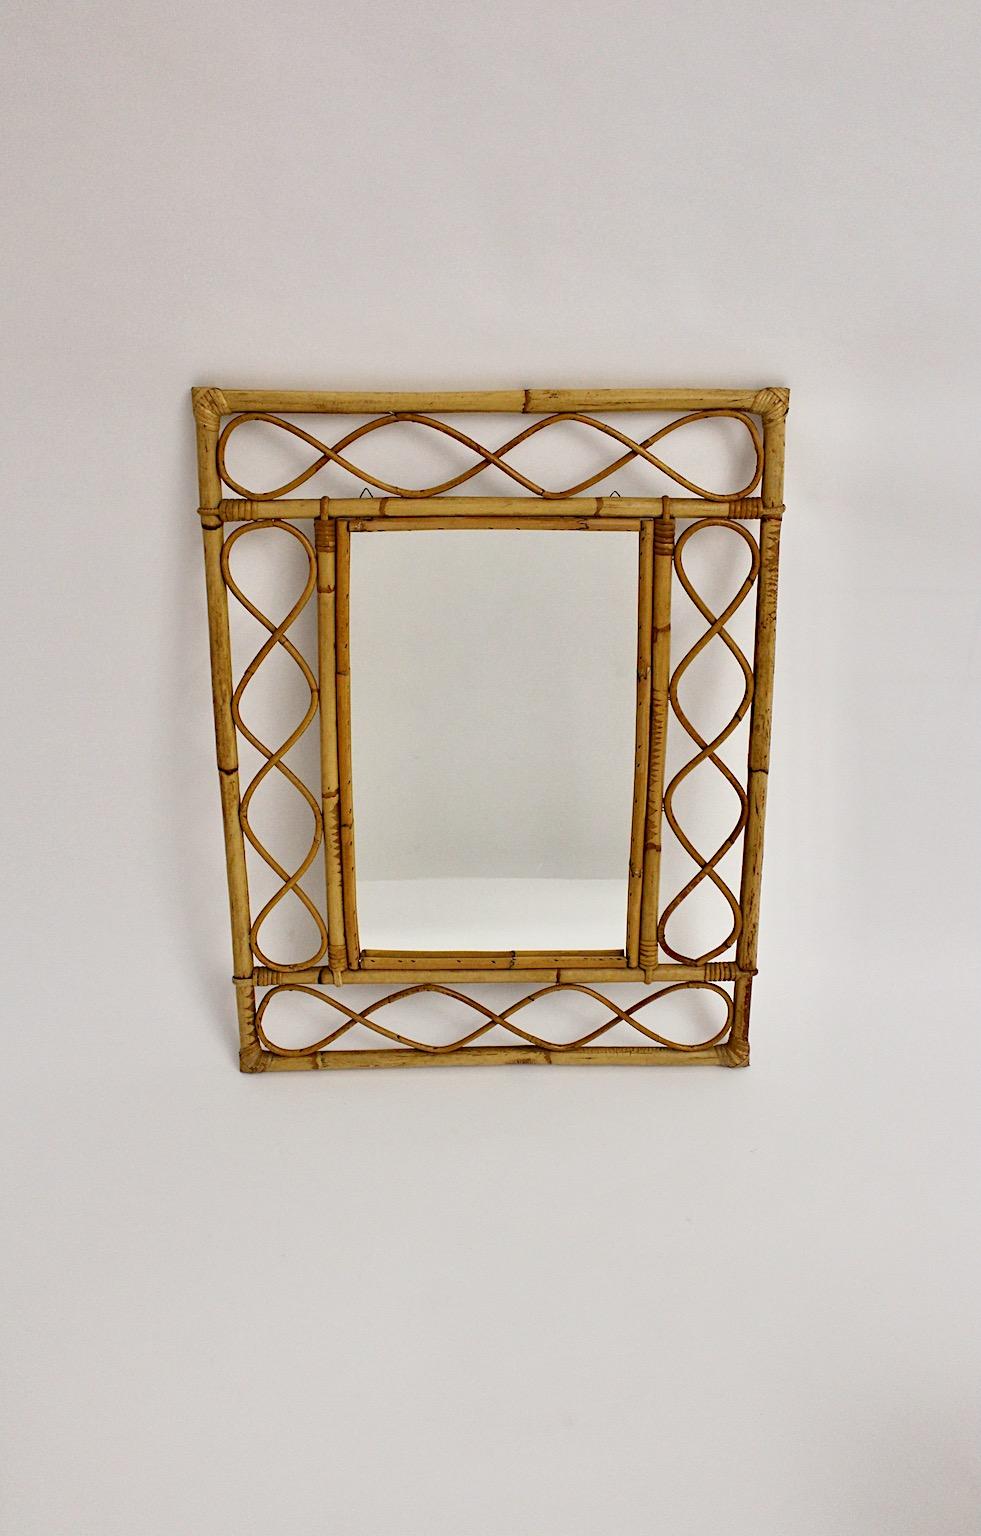 French Rattan Bamboo Riviera Style Organic Modern Vintage Wall Mirror 1970s France